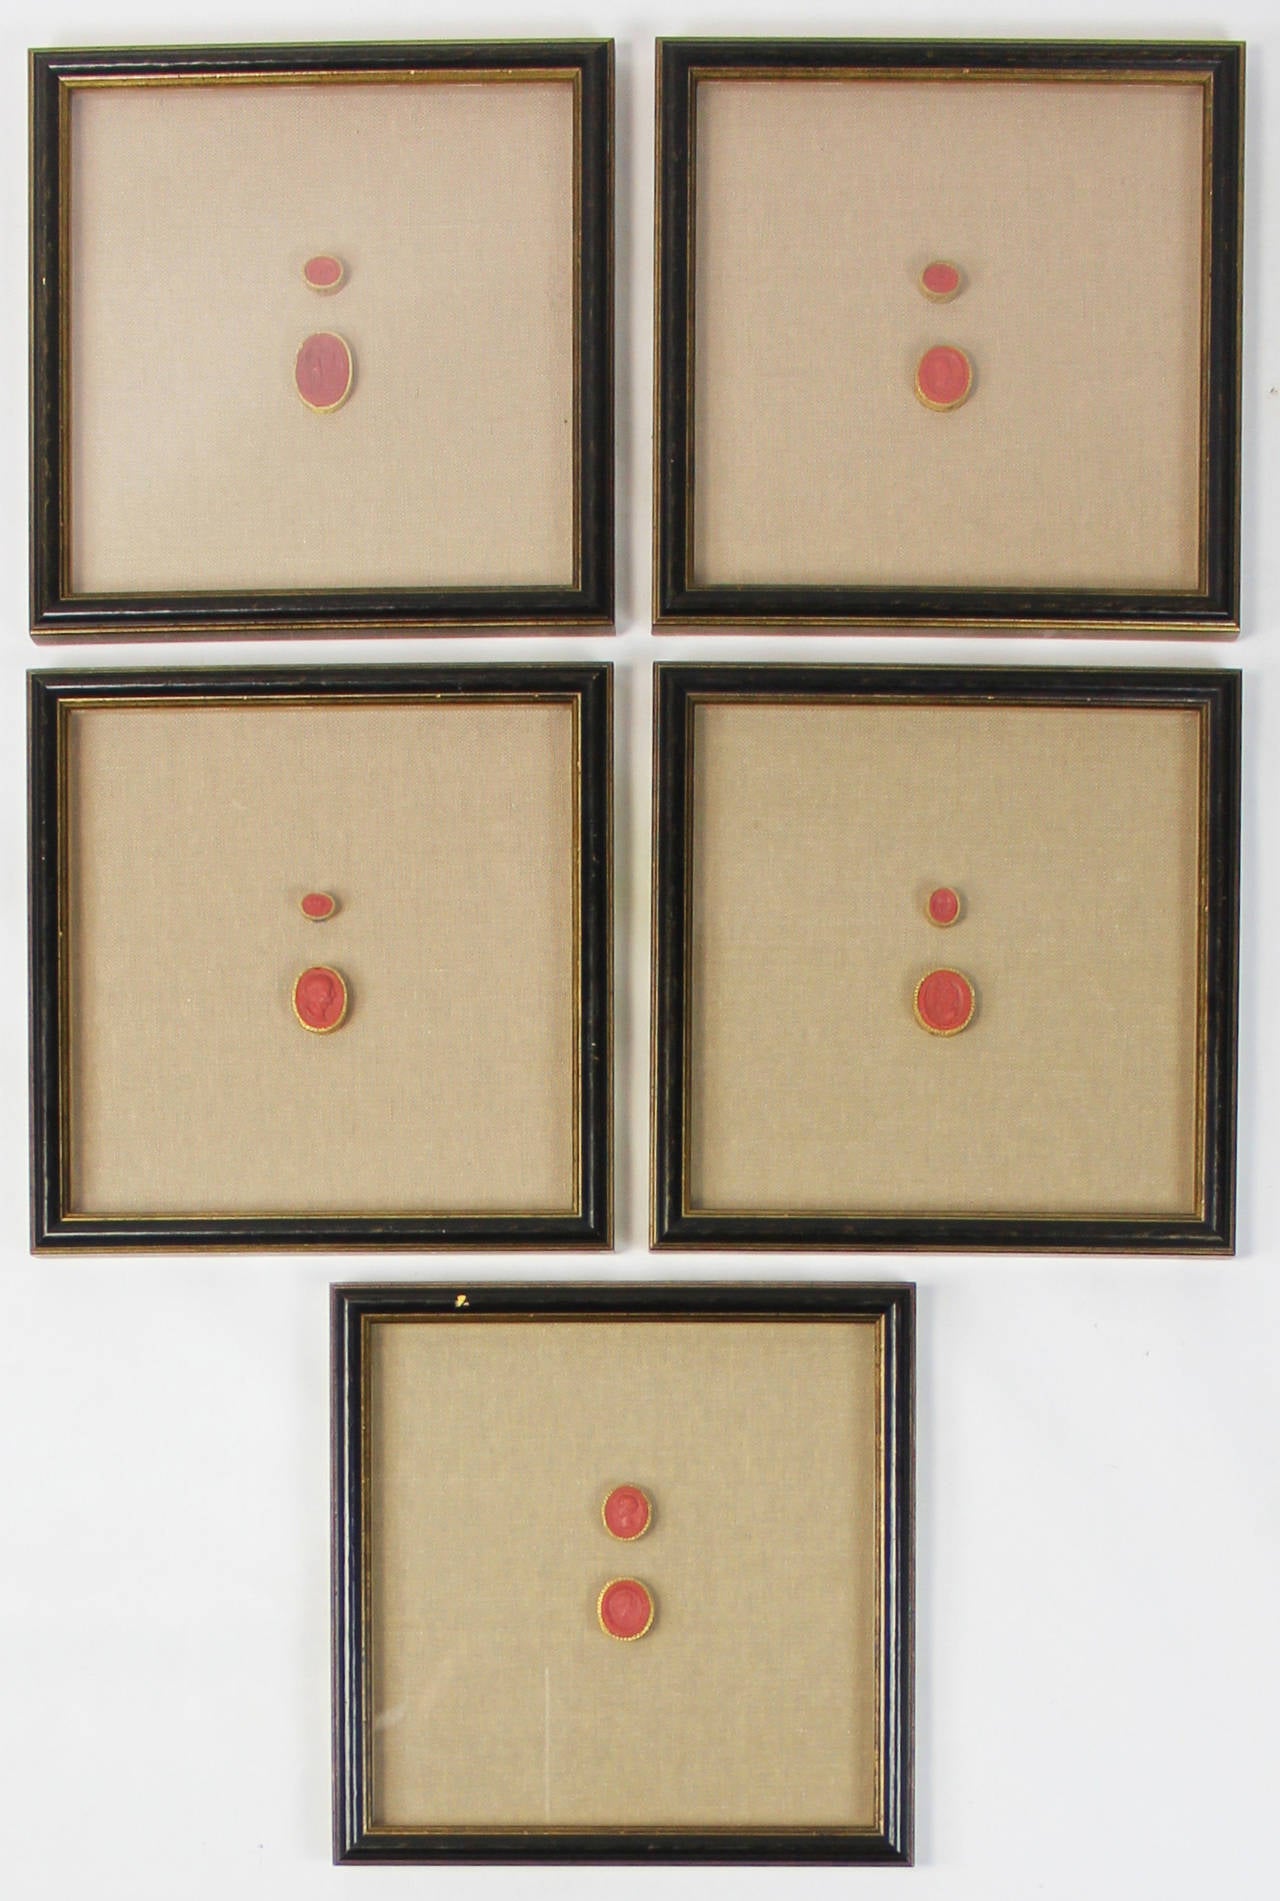 An outstanding collection of Grand Tour red Italian intaglios dating from the 1830s. Each intaglio is hand numbered and set in gilt braid, mounted on linen matting and displayed in ebonized shadow box frames.